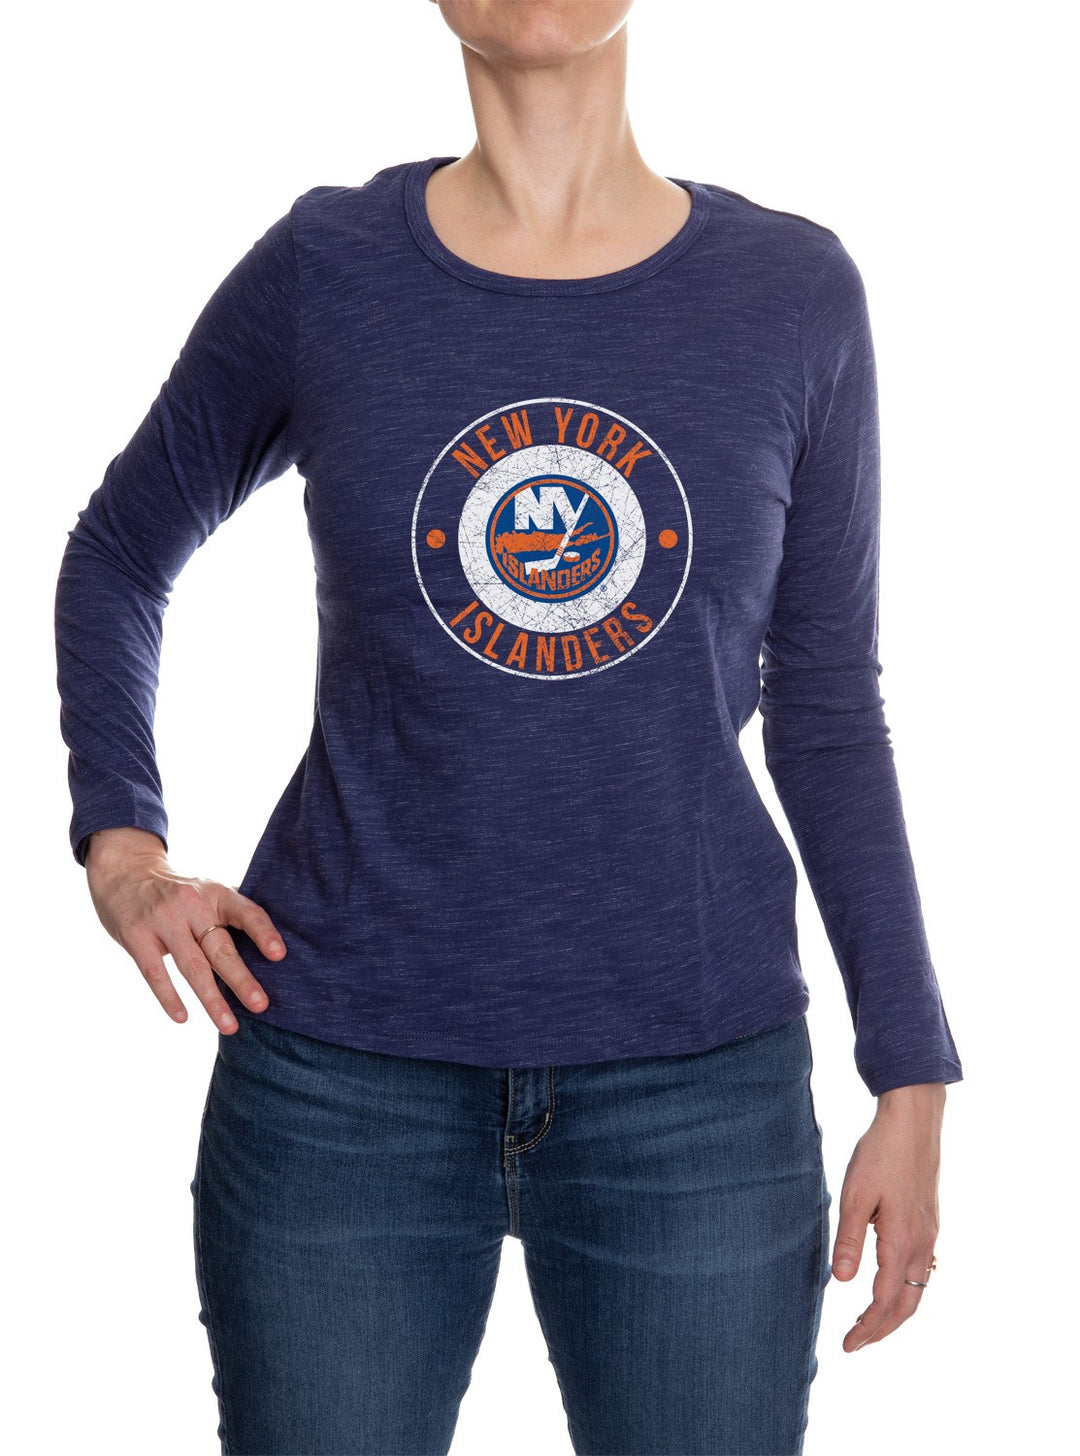 New York Islanders Long Sleeve Shirt for Women in Blue Front View